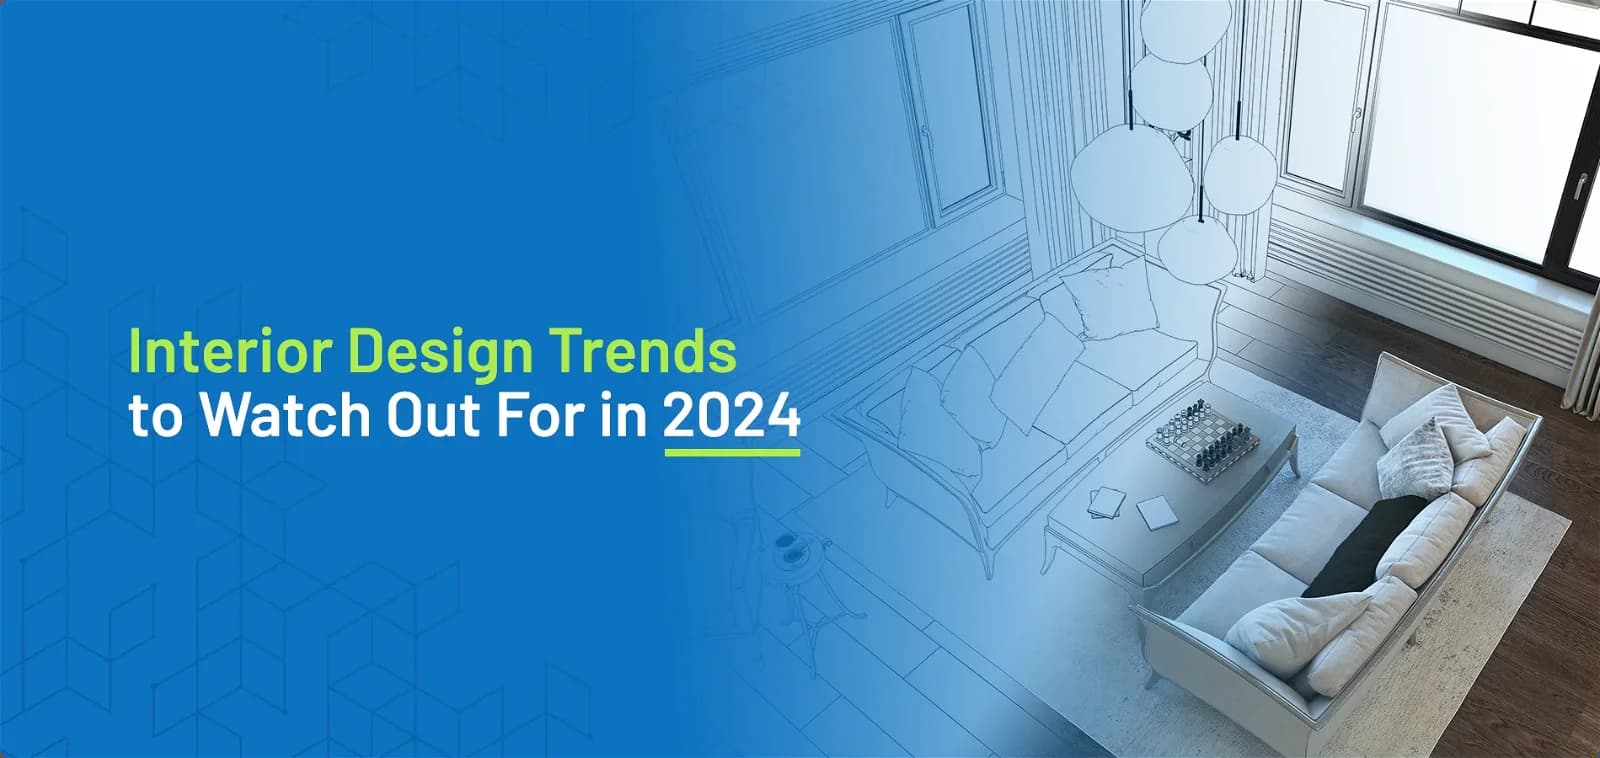 5 Interior Design Trends To Watch Out for in 2024